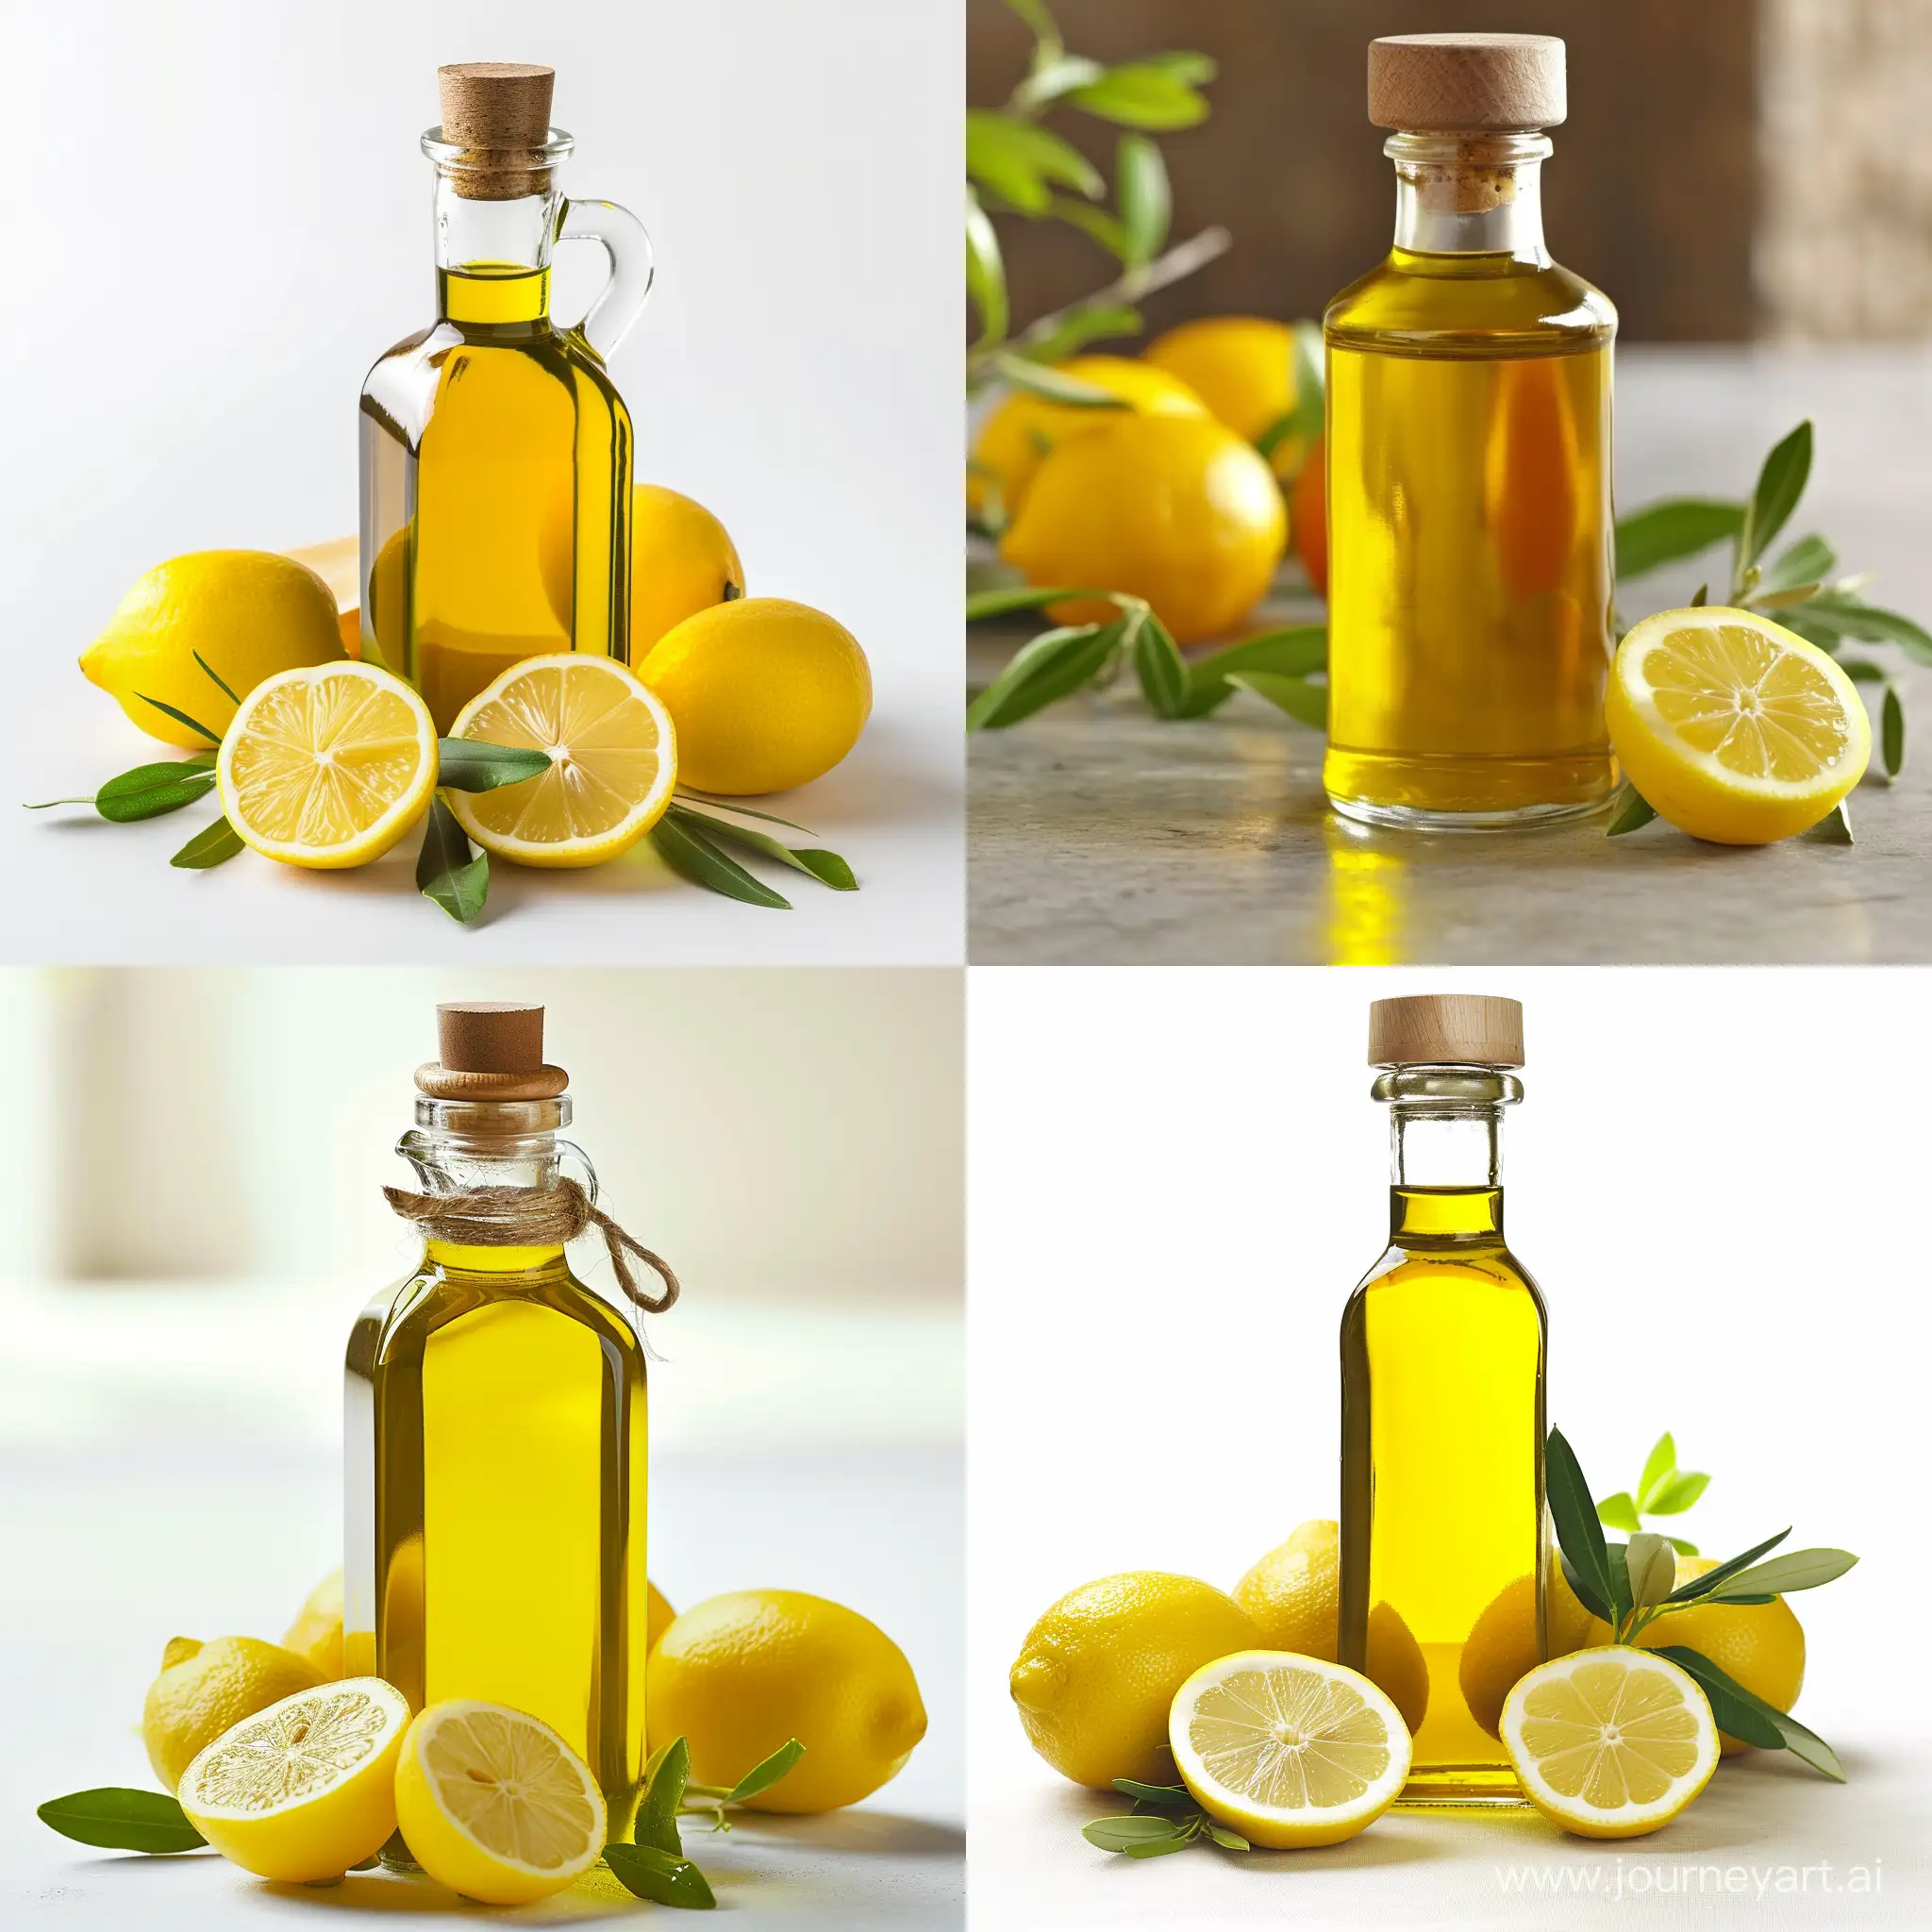 Realistic-Photo-of-Olive-Oil-Bottle-and-Lemons